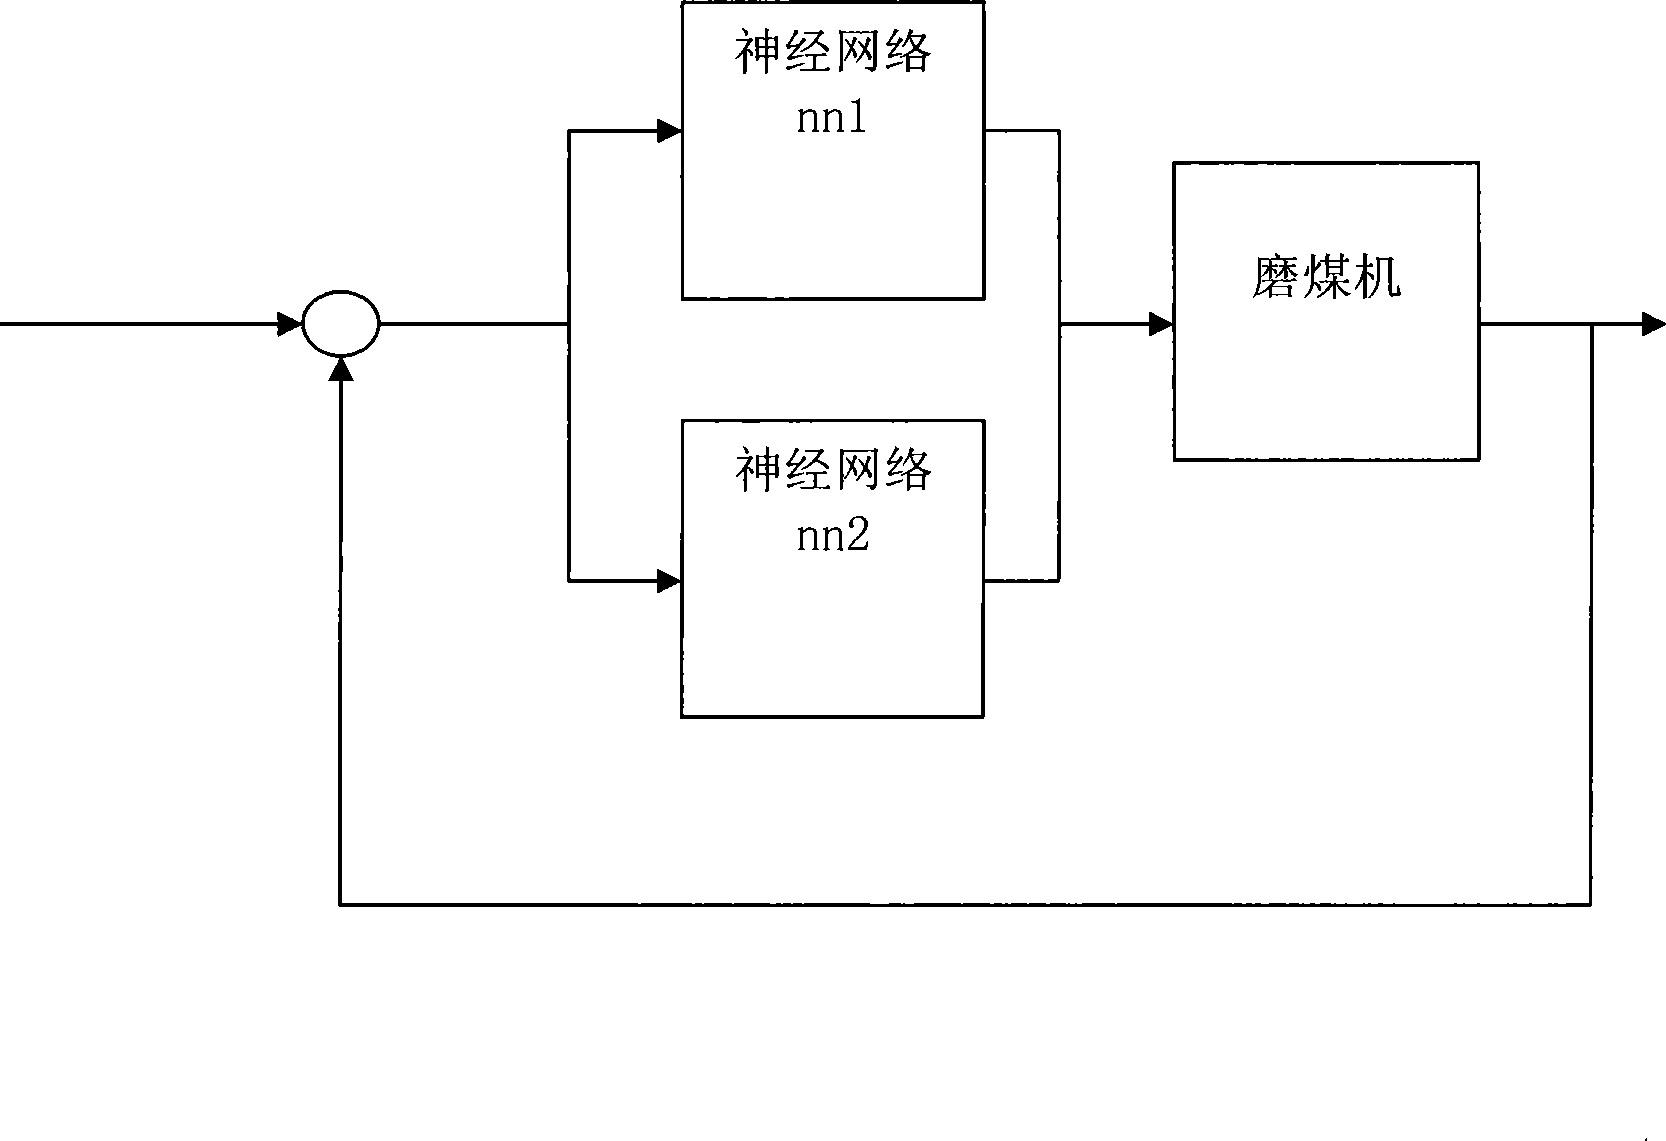 Neural network control method for direct-blowing type coal mill